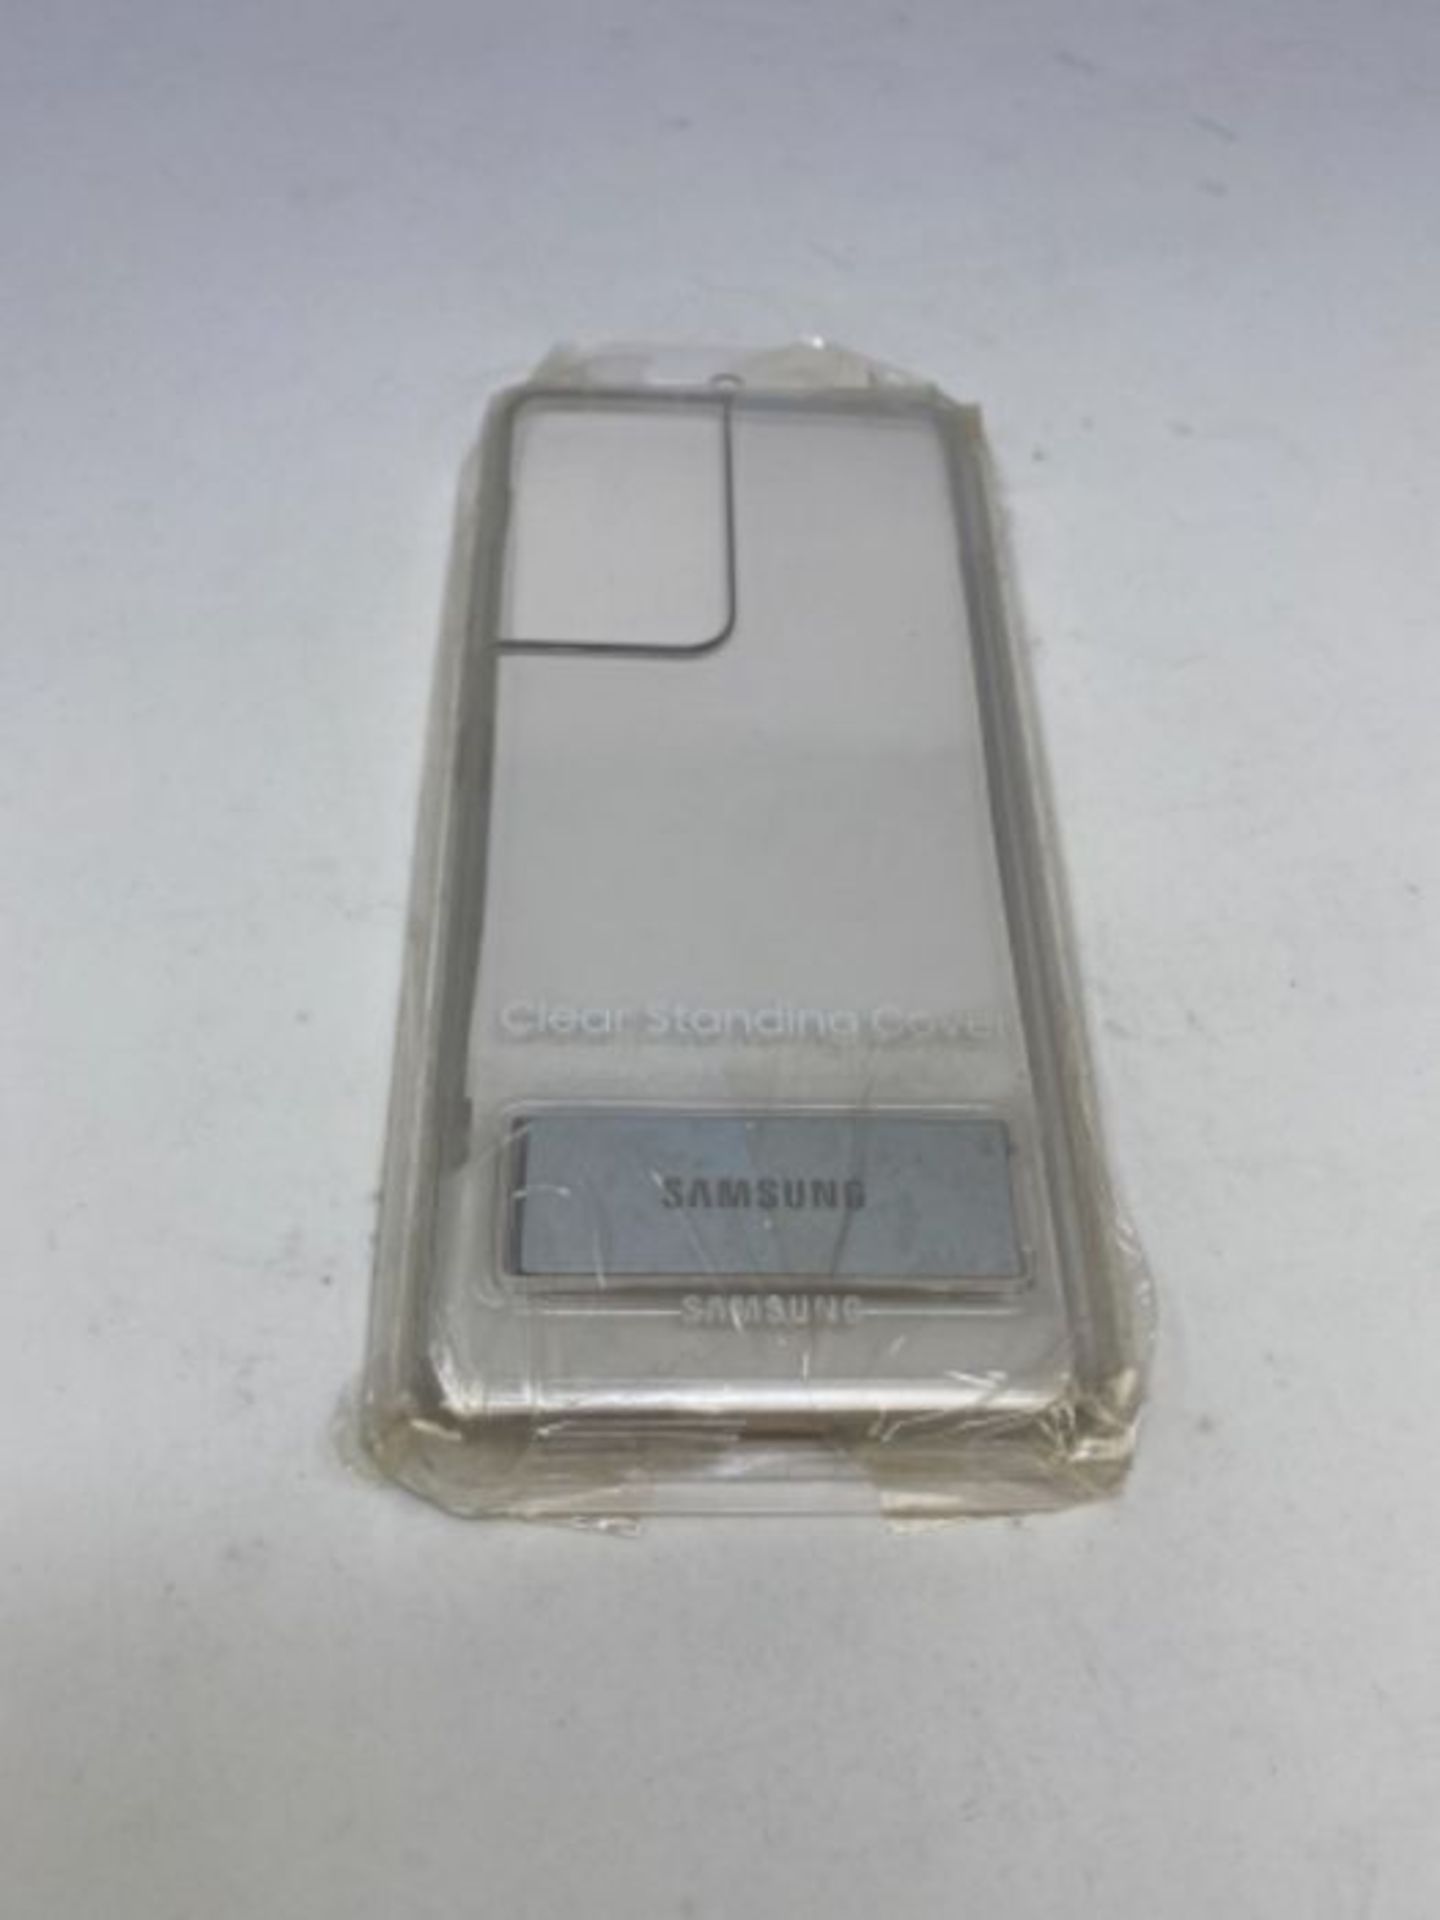 Samsung Galaxy S21 Ultra 5G Clear Standing Cover Transparent - Image 2 of 2